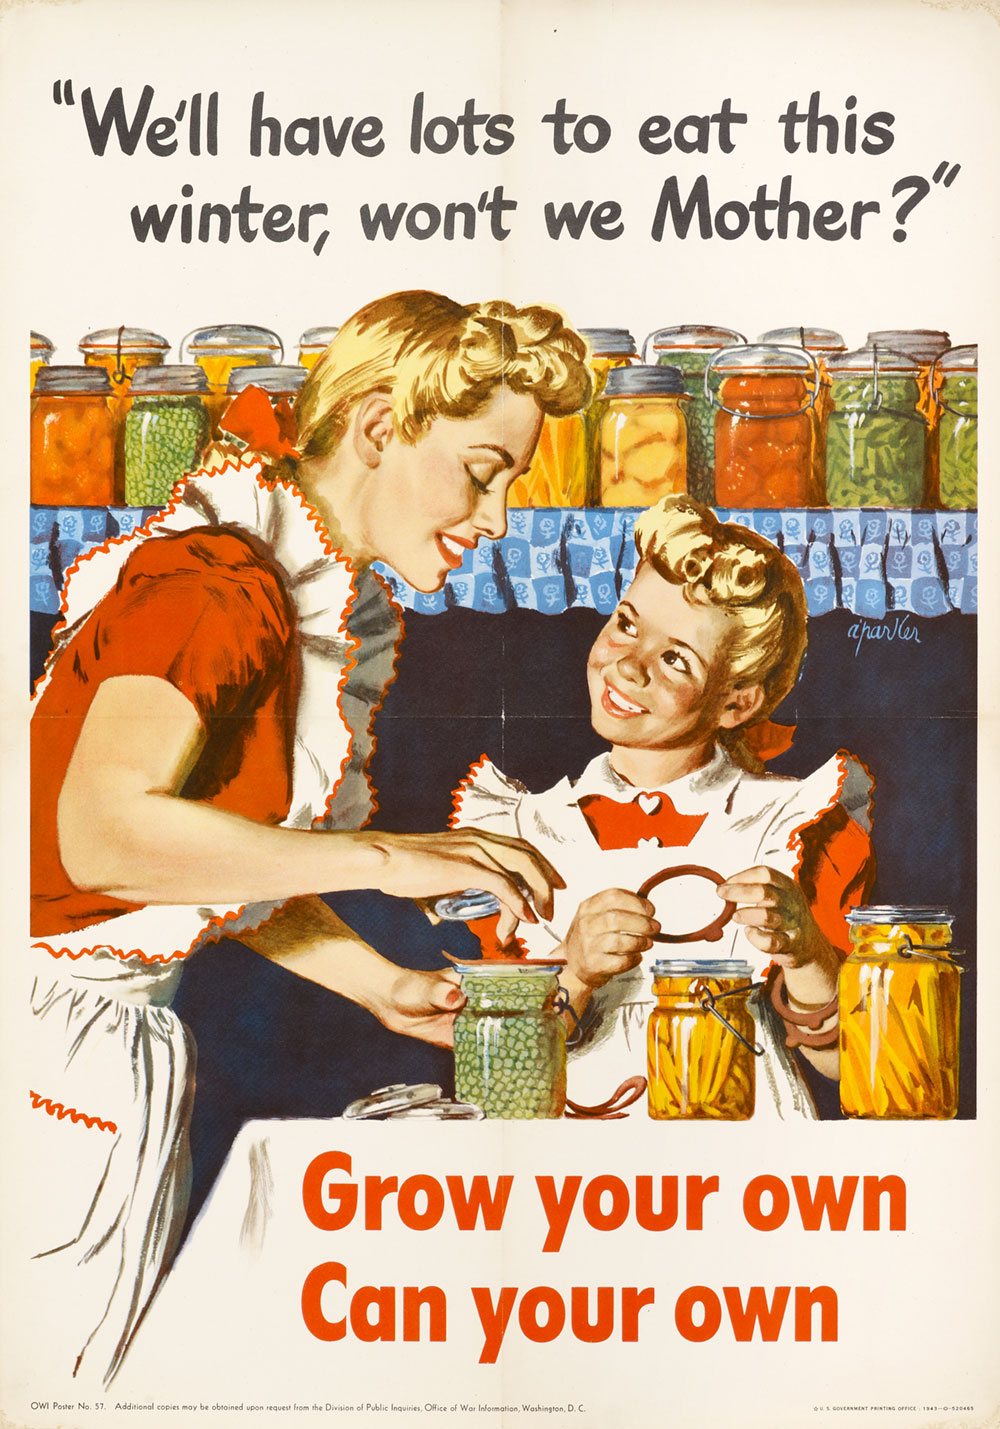 Poster depicting a mother and daughter standing at a kitchen table canning fruits and vegetables